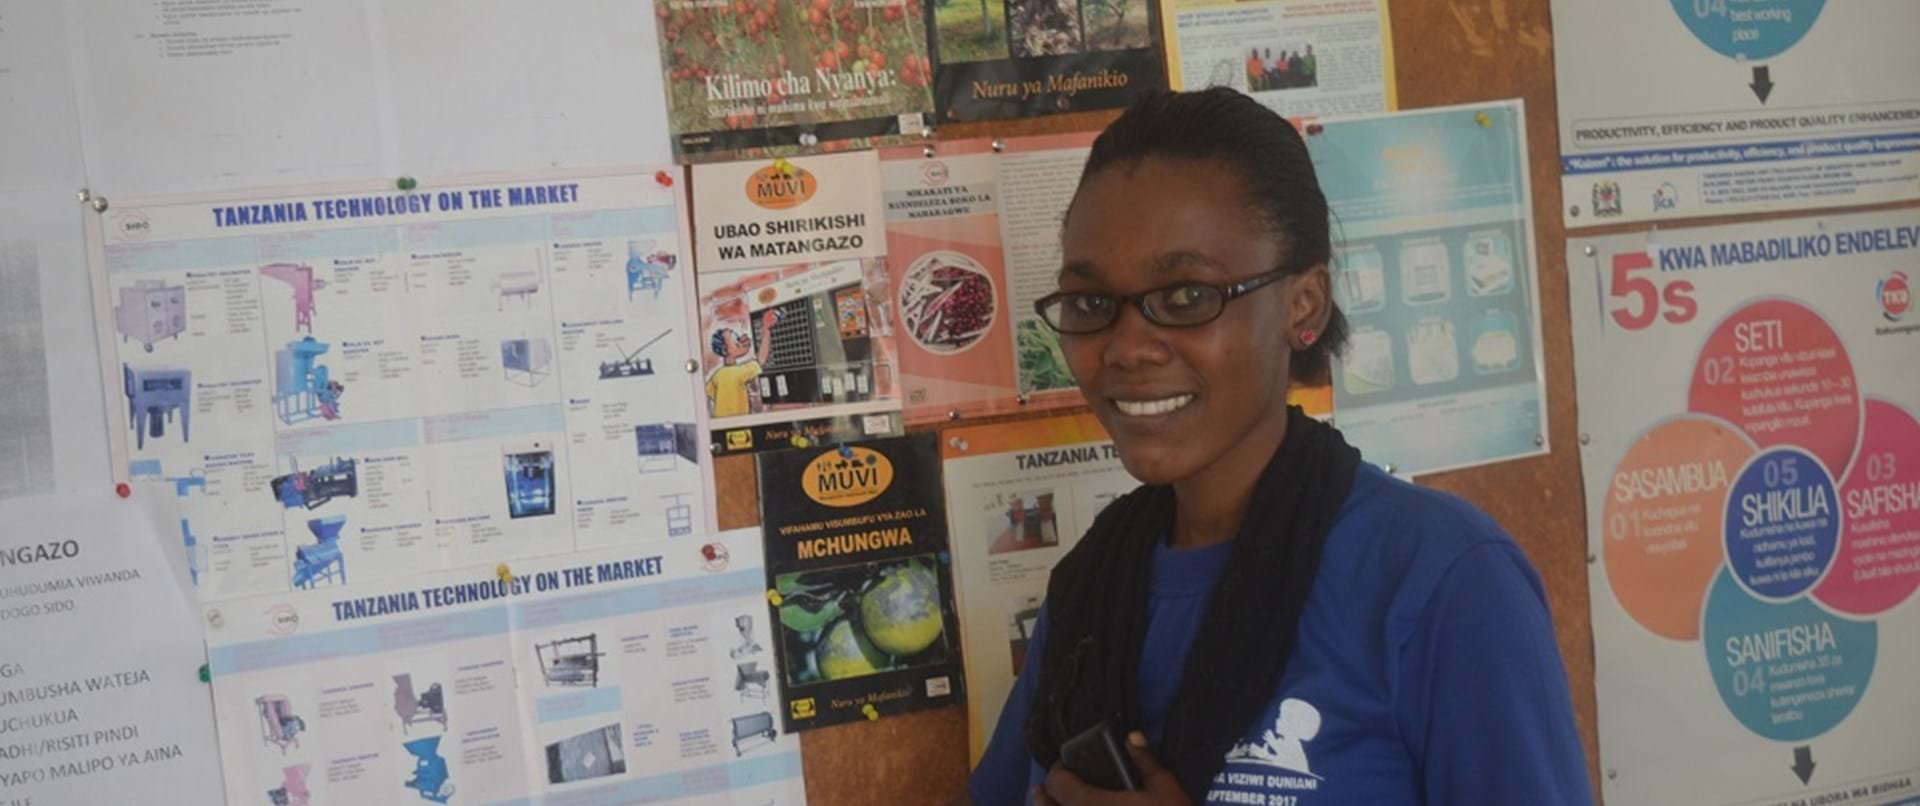 A young woman wearing glasses standing in front of a notice board